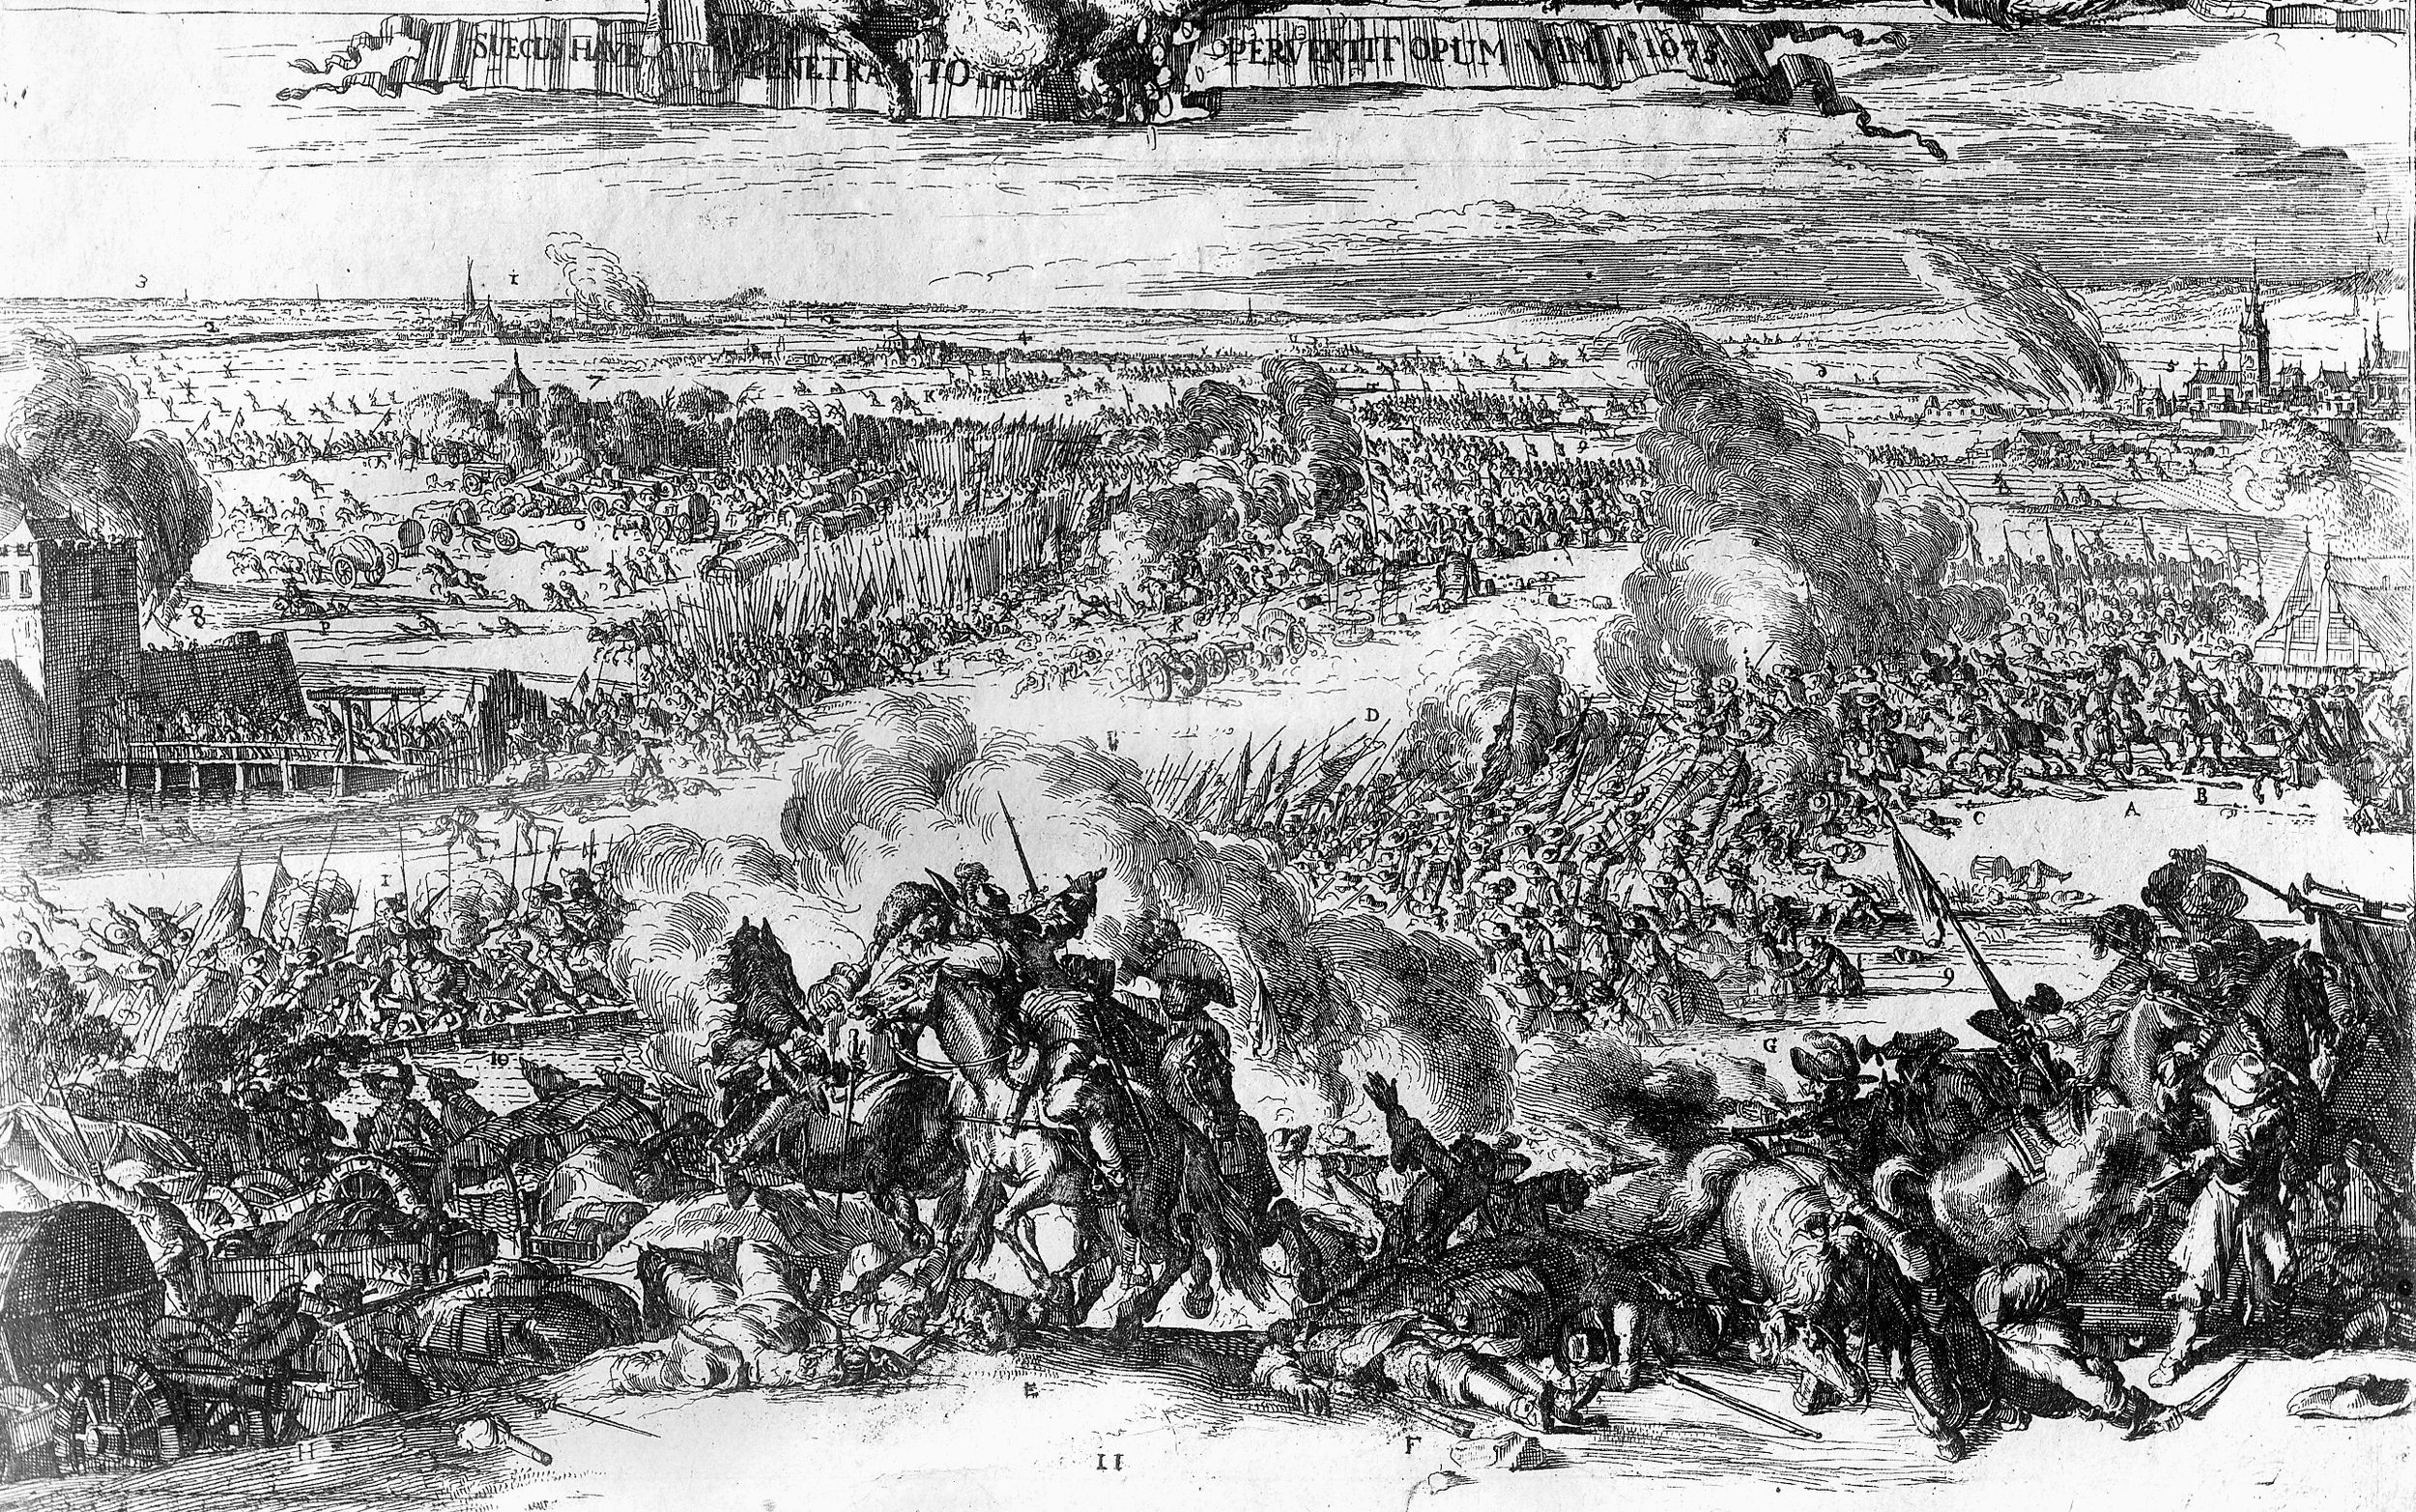 The height of battle at Ferhbellin is captured in this contemporary copper engraving by Romeynde Hooghe.